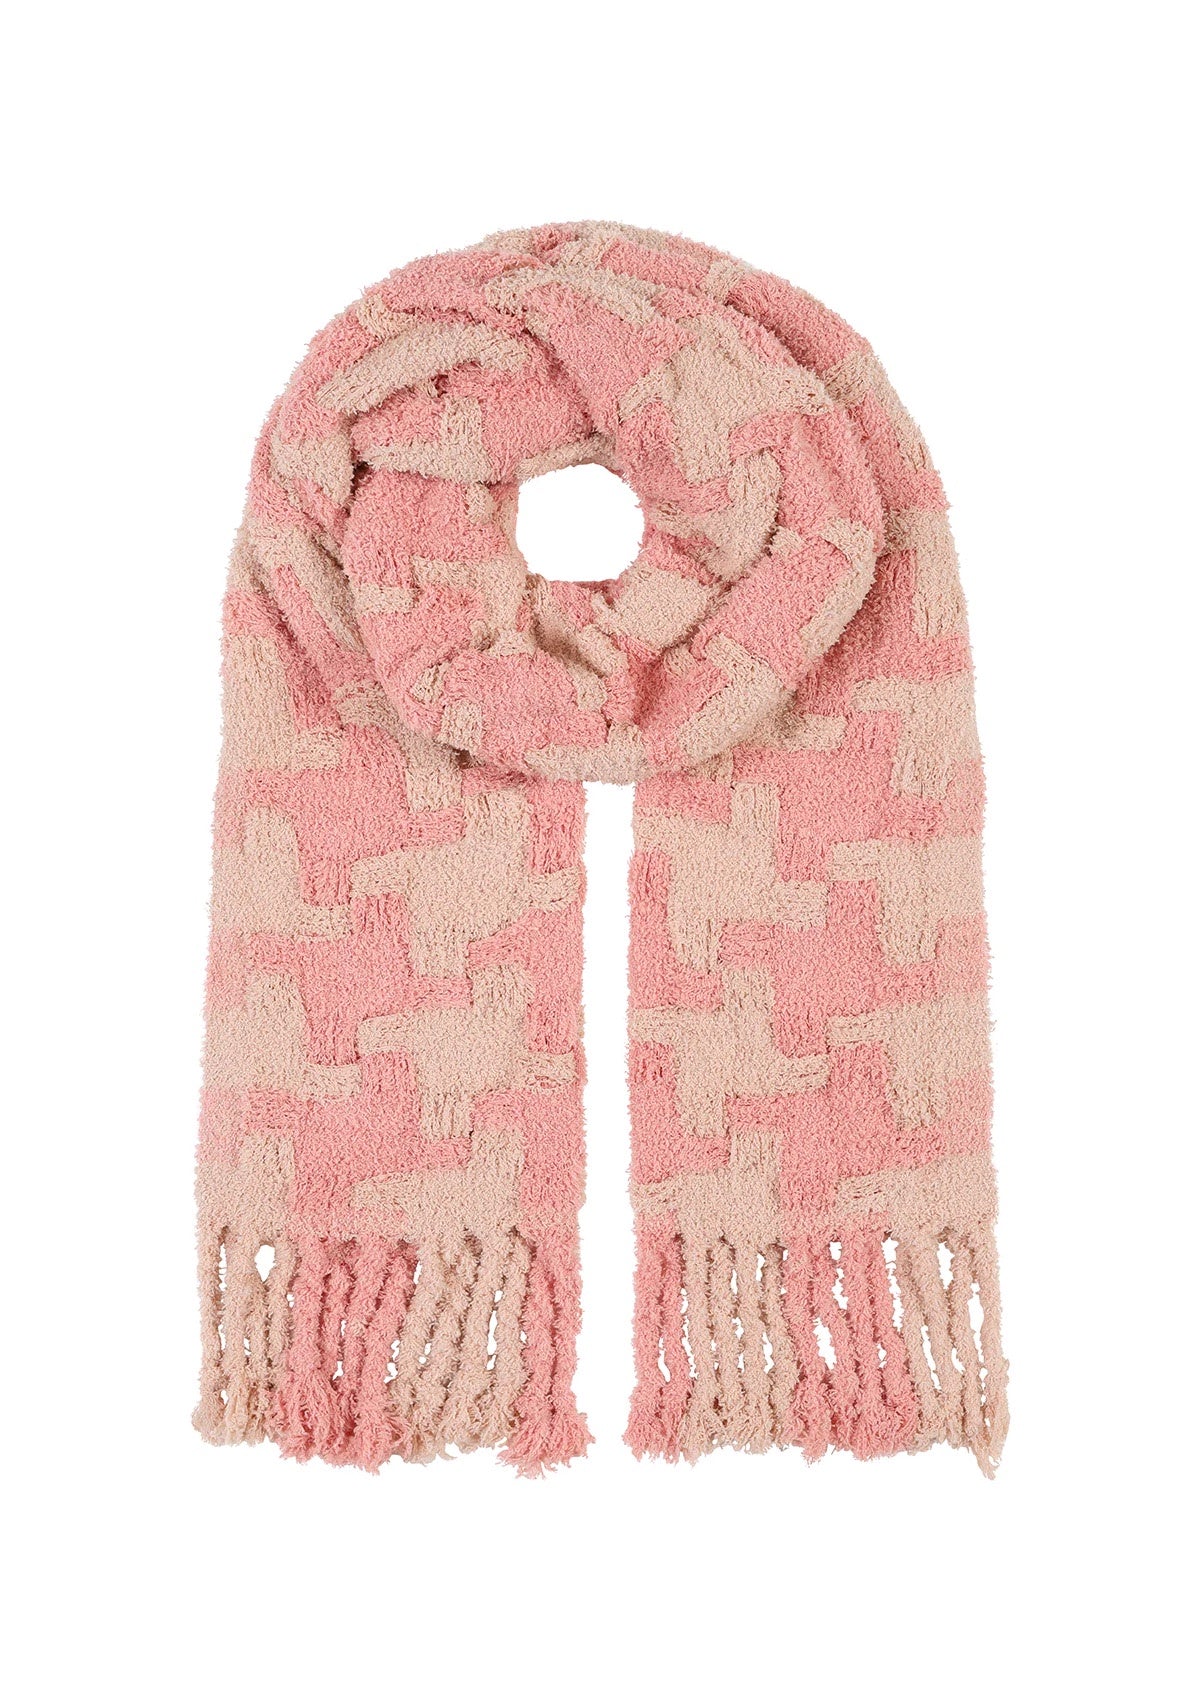 Libby Loves Annie Scarf Nude/Pink